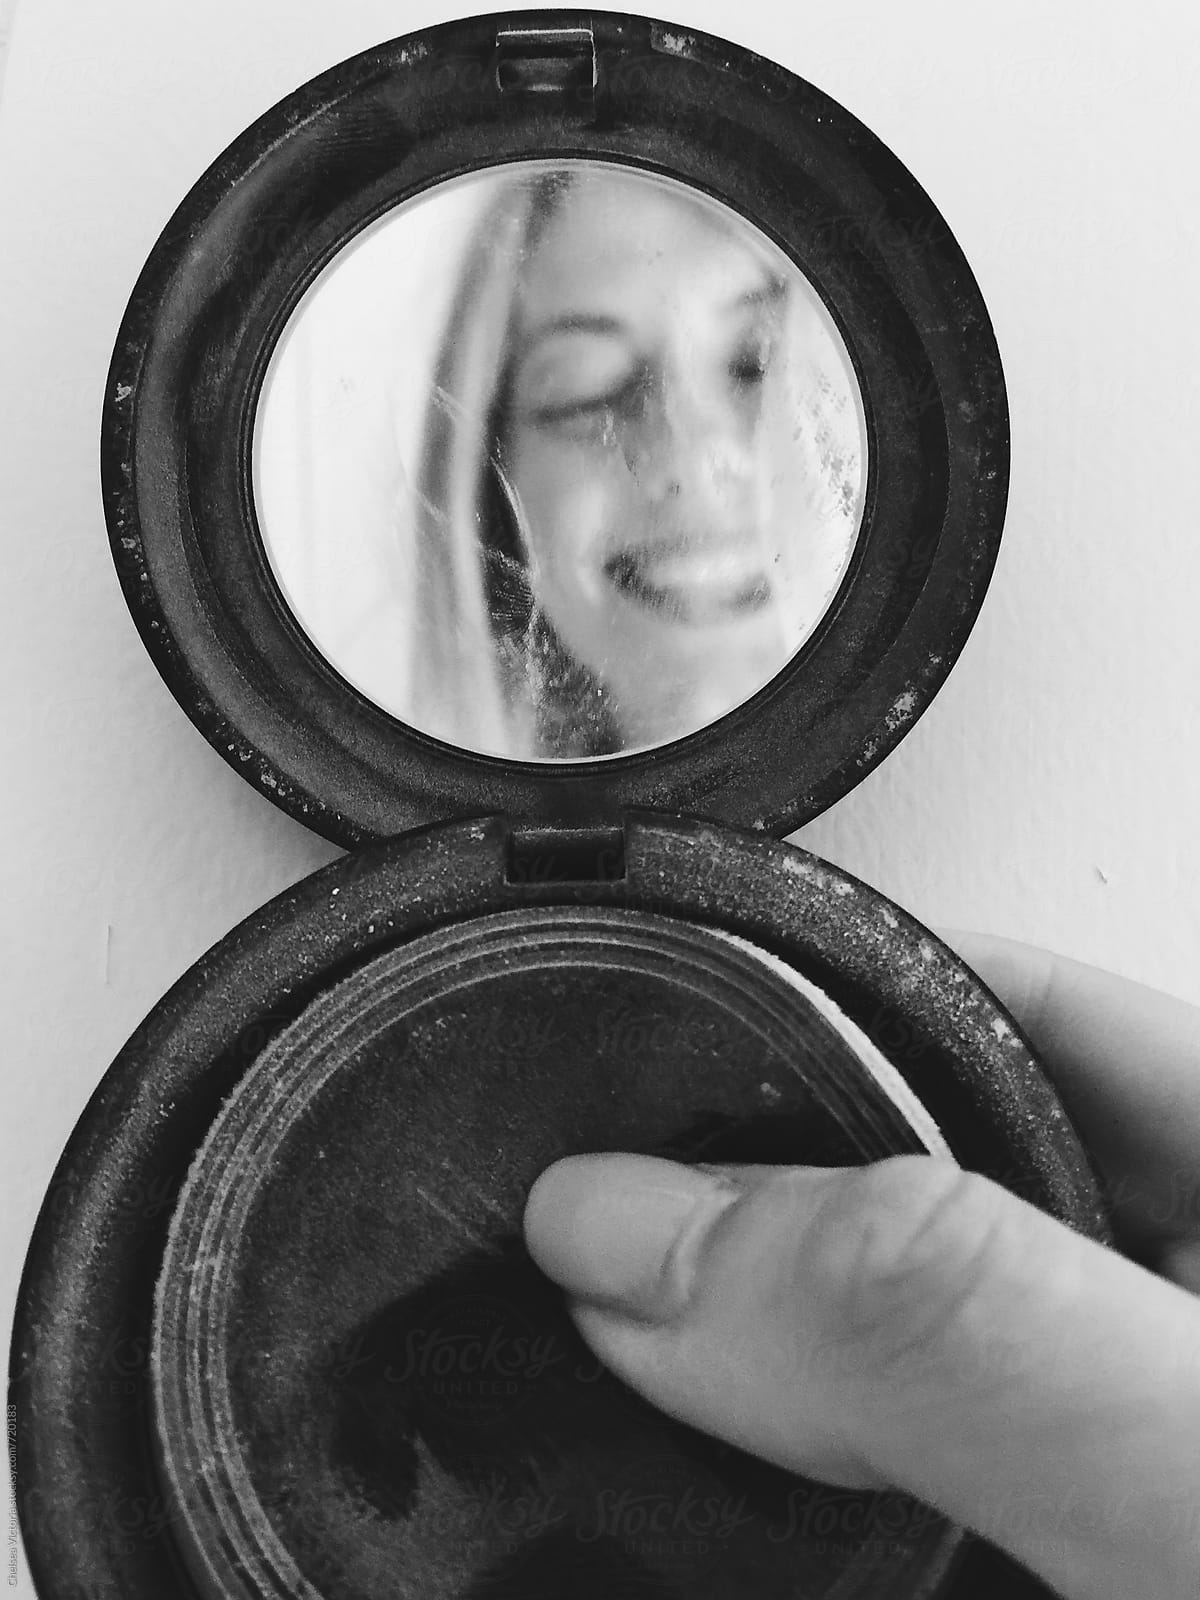 Series of self portraits of a woman making faces in a compact mirror.